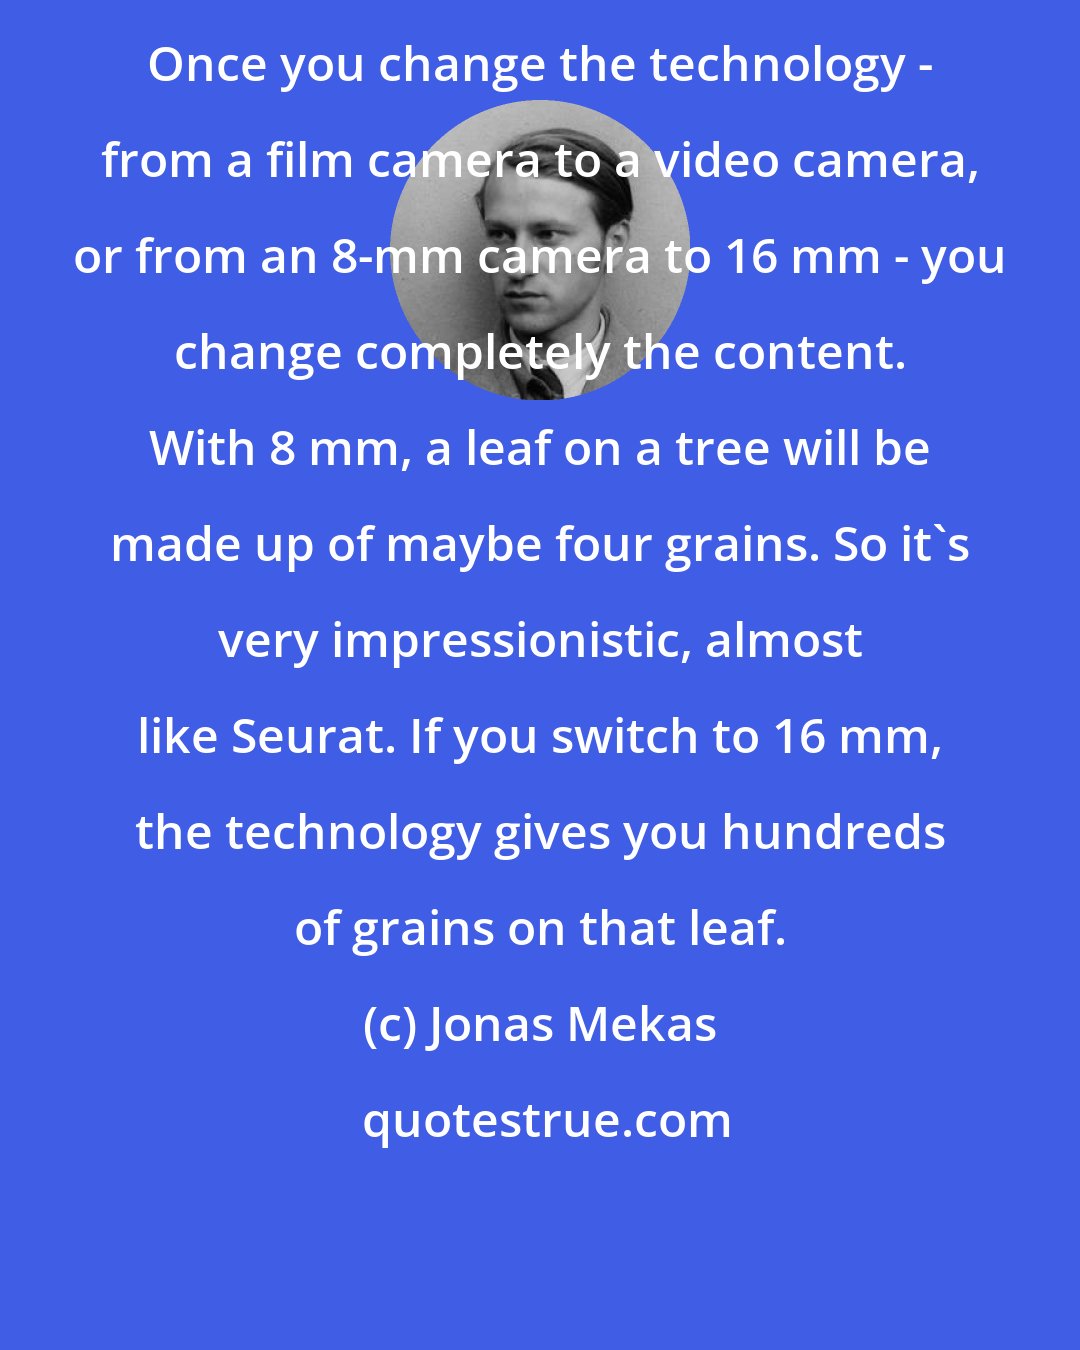 Jonas Mekas: Once you change the technology - from a film camera to a video camera, or from an 8-mm camera to 16 mm - you change completely the content. With 8 mm, a leaf on a tree will be made up of maybe four grains. So it's very impressionistic, almost like Seurat. If you switch to 16 mm, the technology gives you hundreds of grains on that leaf.